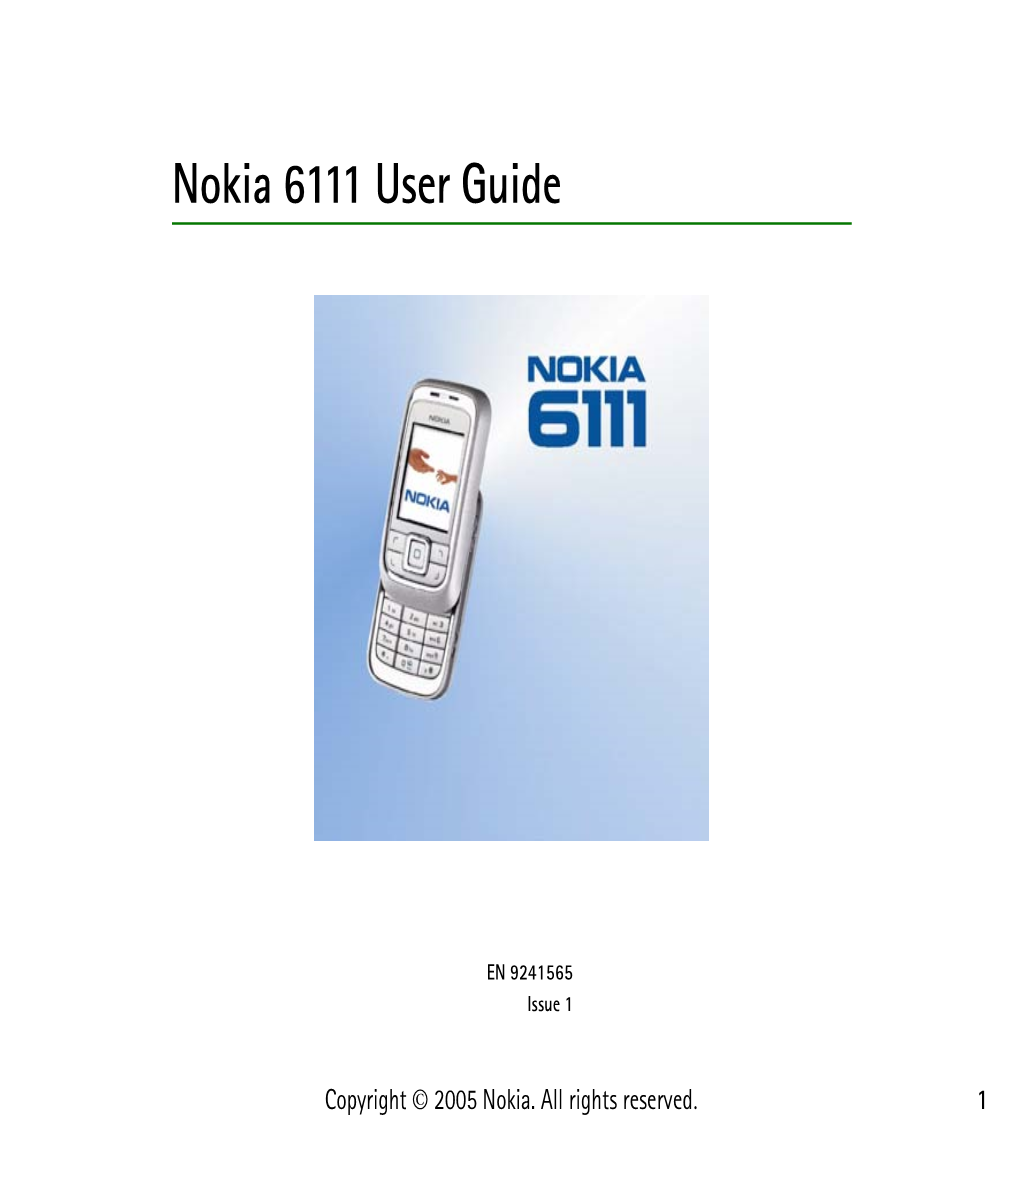 Nokia 6111 User Guide in English